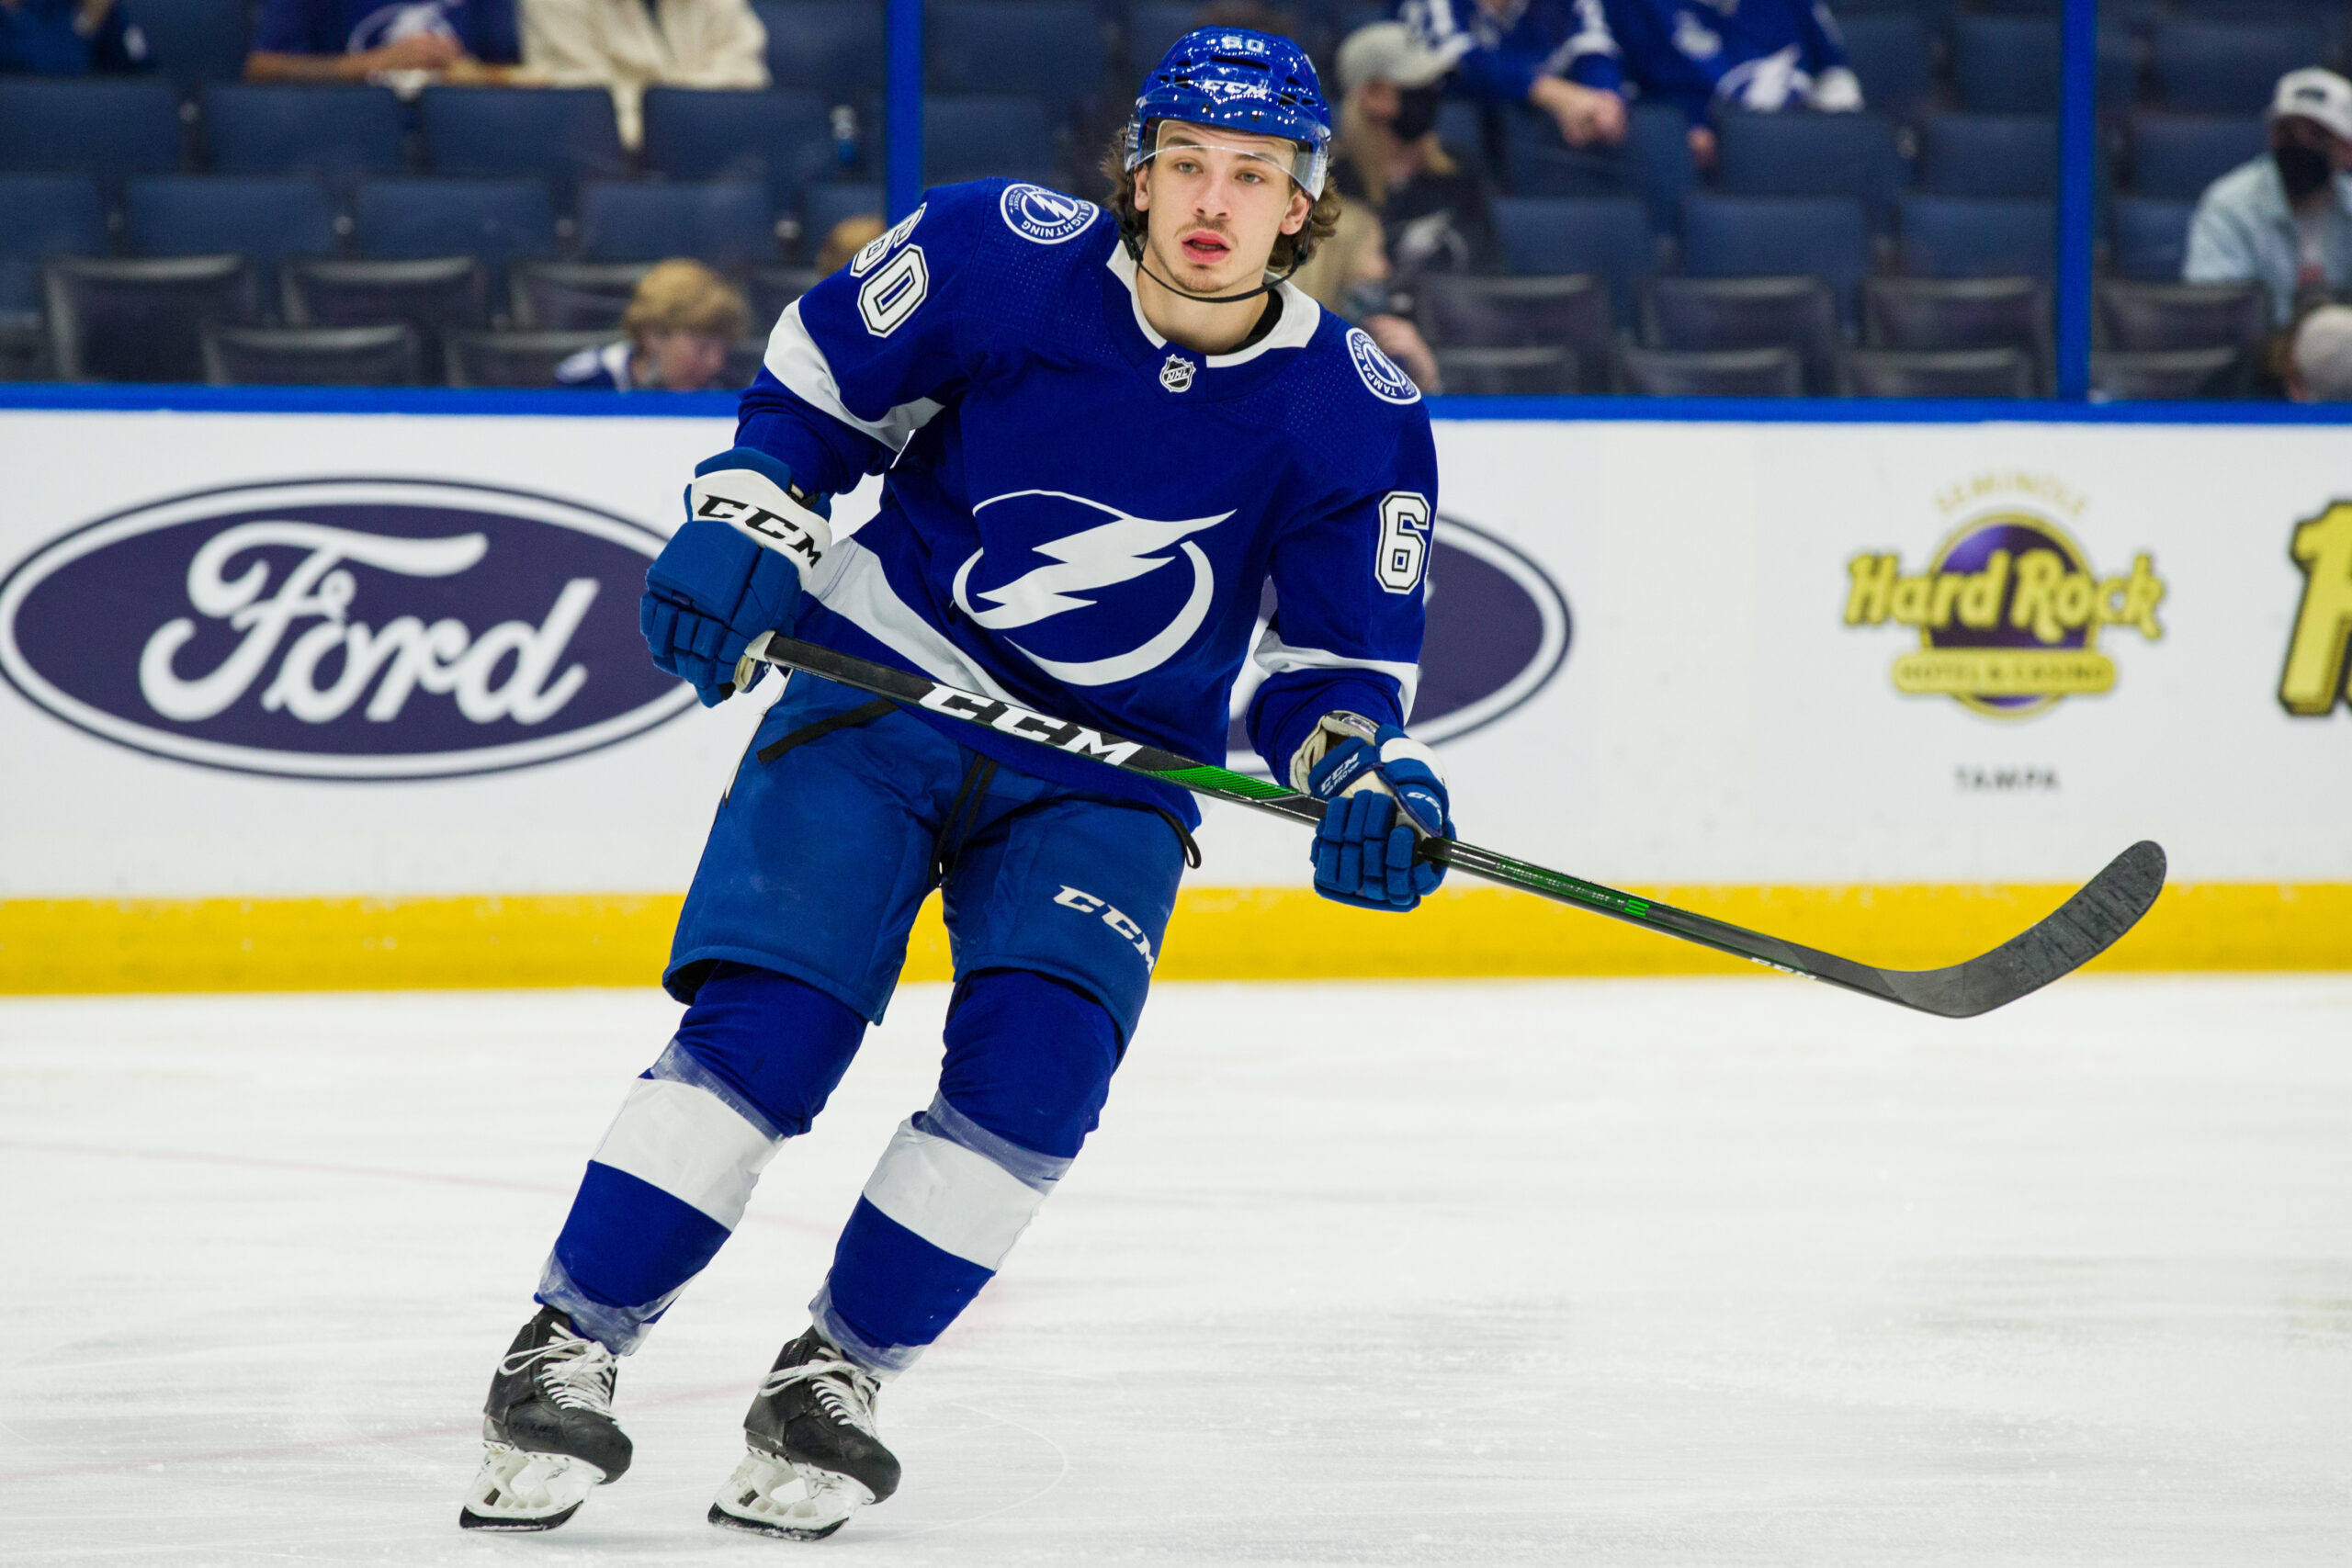 Barre-Boulet’s Reaching His Final Chance With Lightning